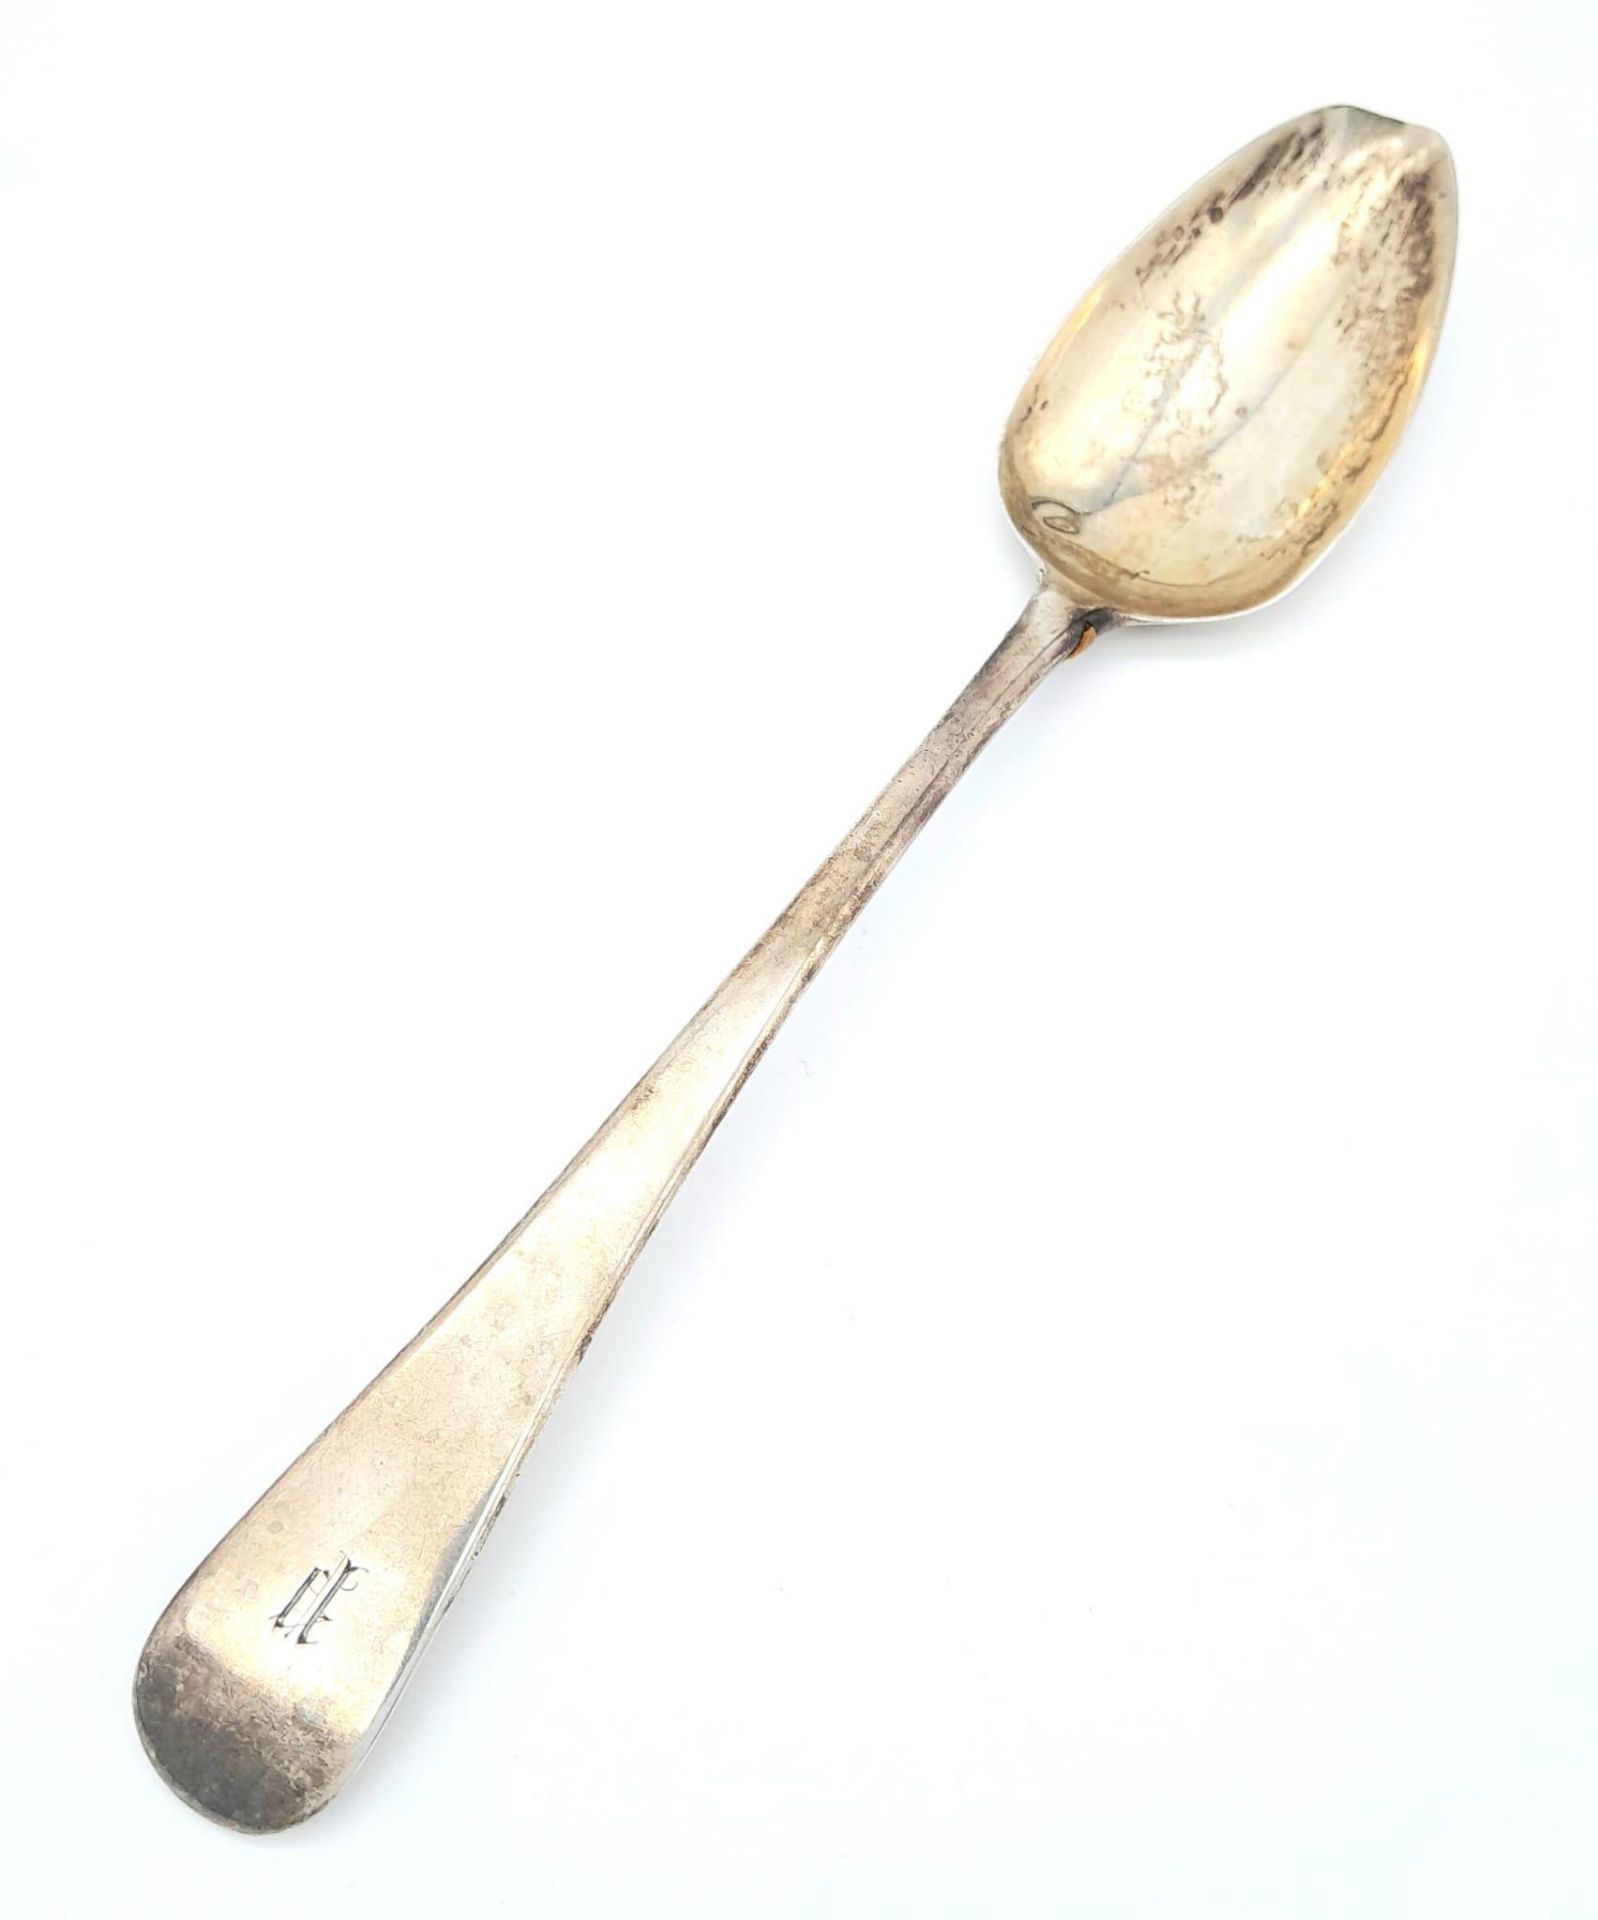 An antique Georgian sterling silver spoon with full London hallmarks, 1799. Total weight 63.1G.